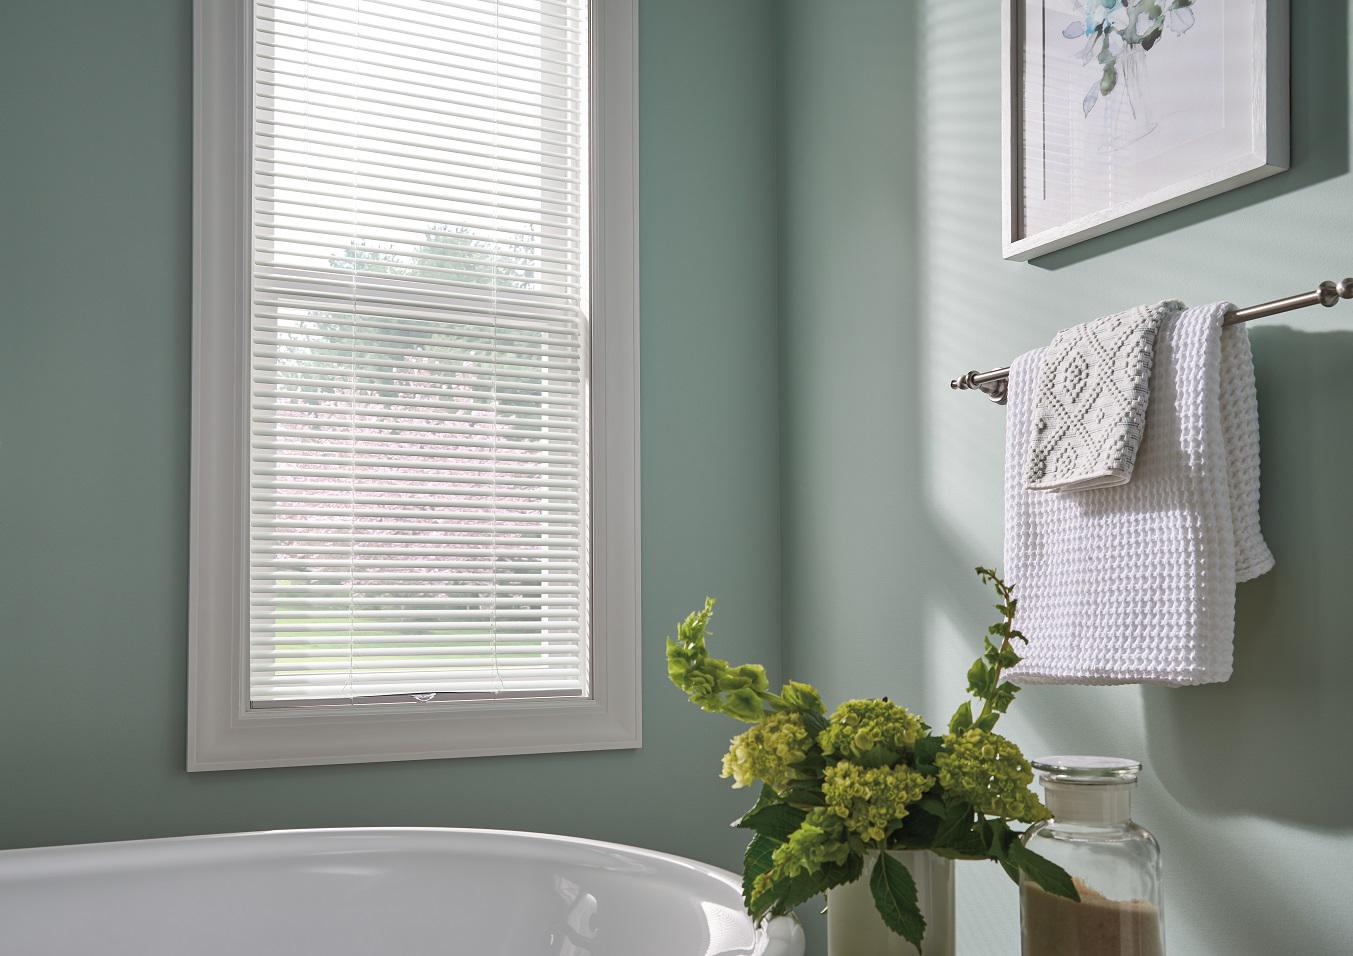 Beautiful bathrooms deserve beautiful blinds. Get a polished look that holds up in moist conditions and offers the privacy you need with these stylish Aluminum Blinds.  BudgetBlindsOfOwasso  AluminumBlinds  MoistureResistantBlinds  BlindedByBeauty  FreeConsultation  WindowWednesday